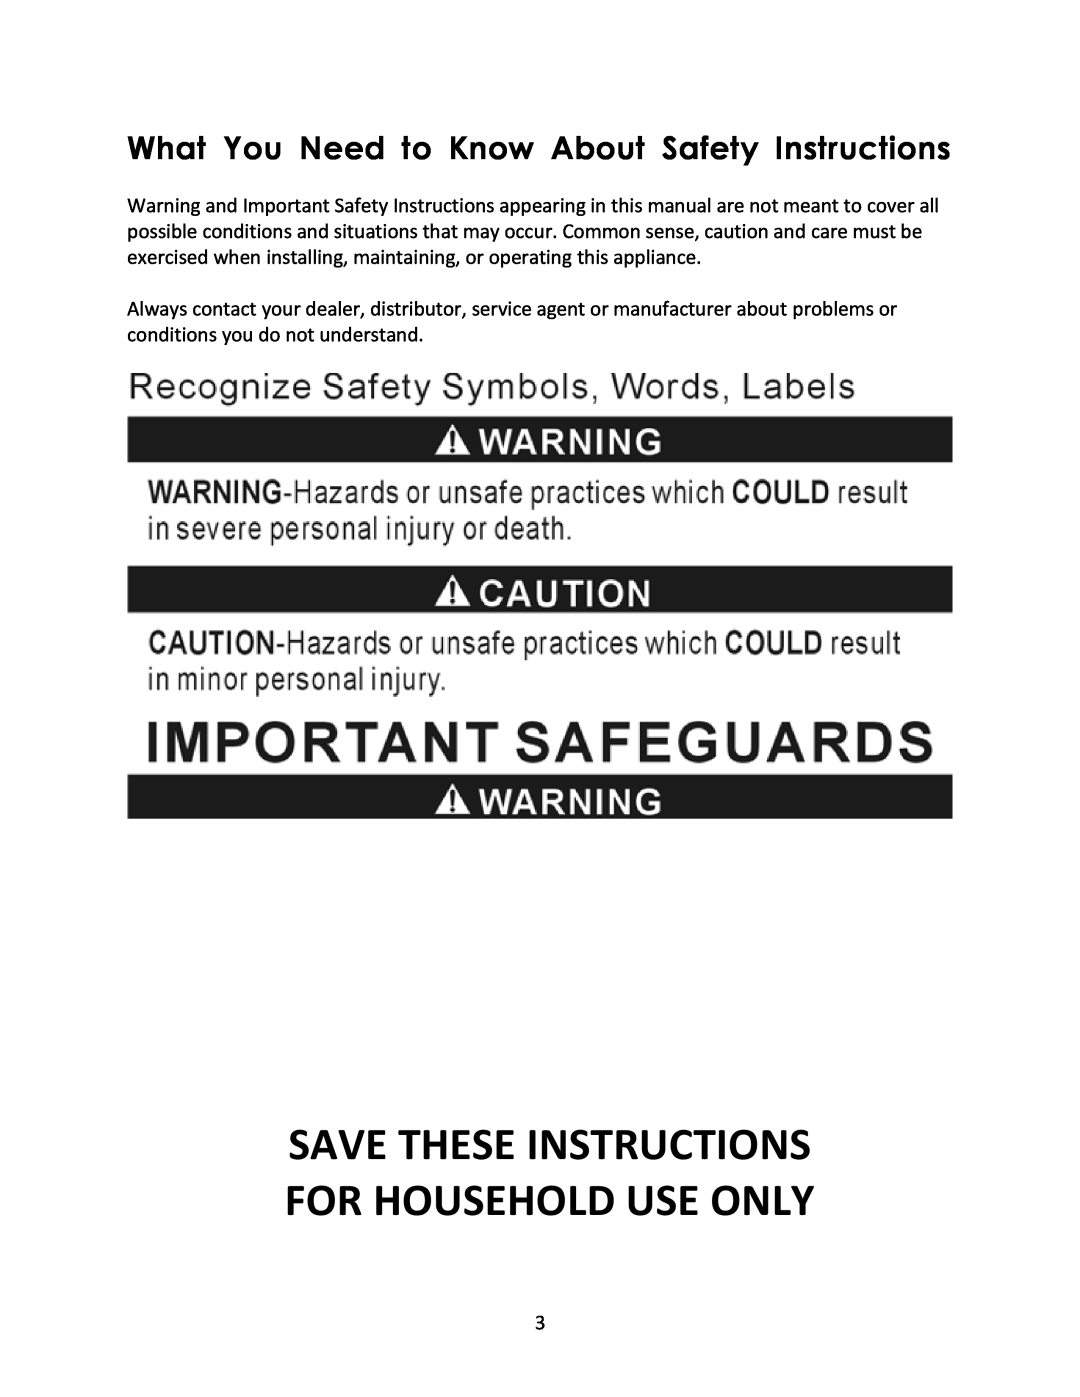 Magic Chef MCSG19B What You Need to Know About Safety Instructions, Save These Instructions For Household Use Only 